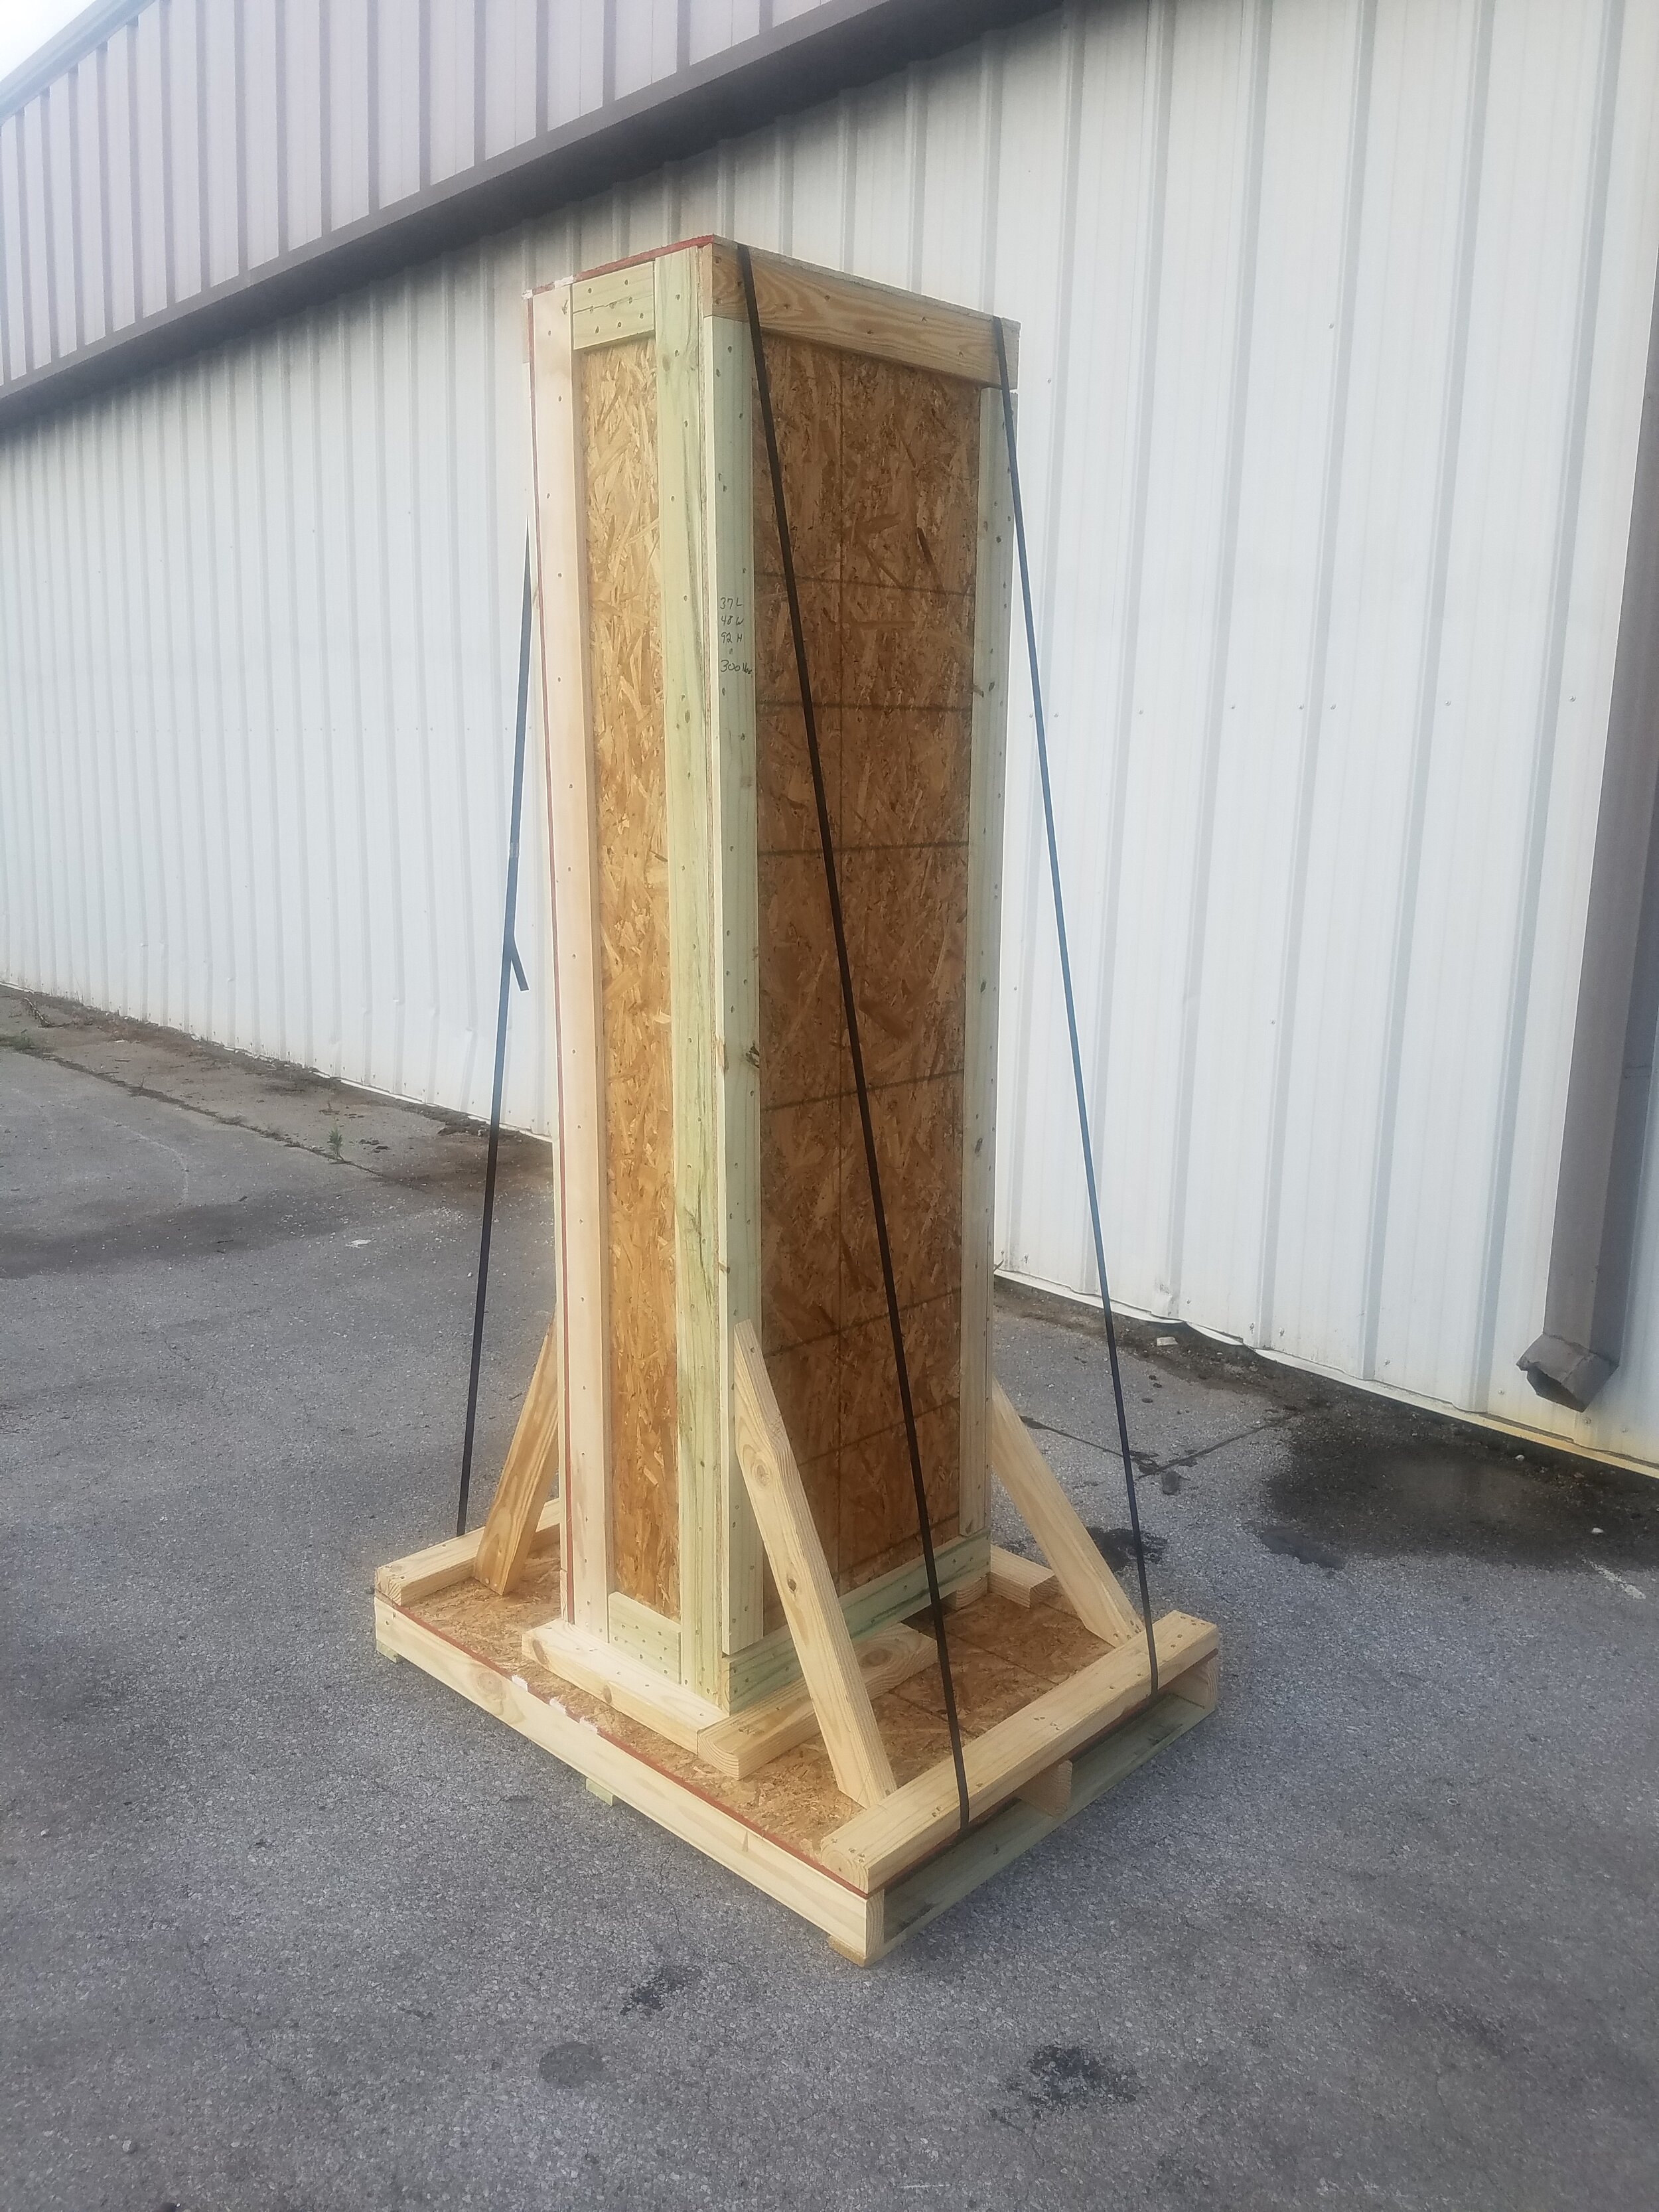 Crated Grandfather Clock